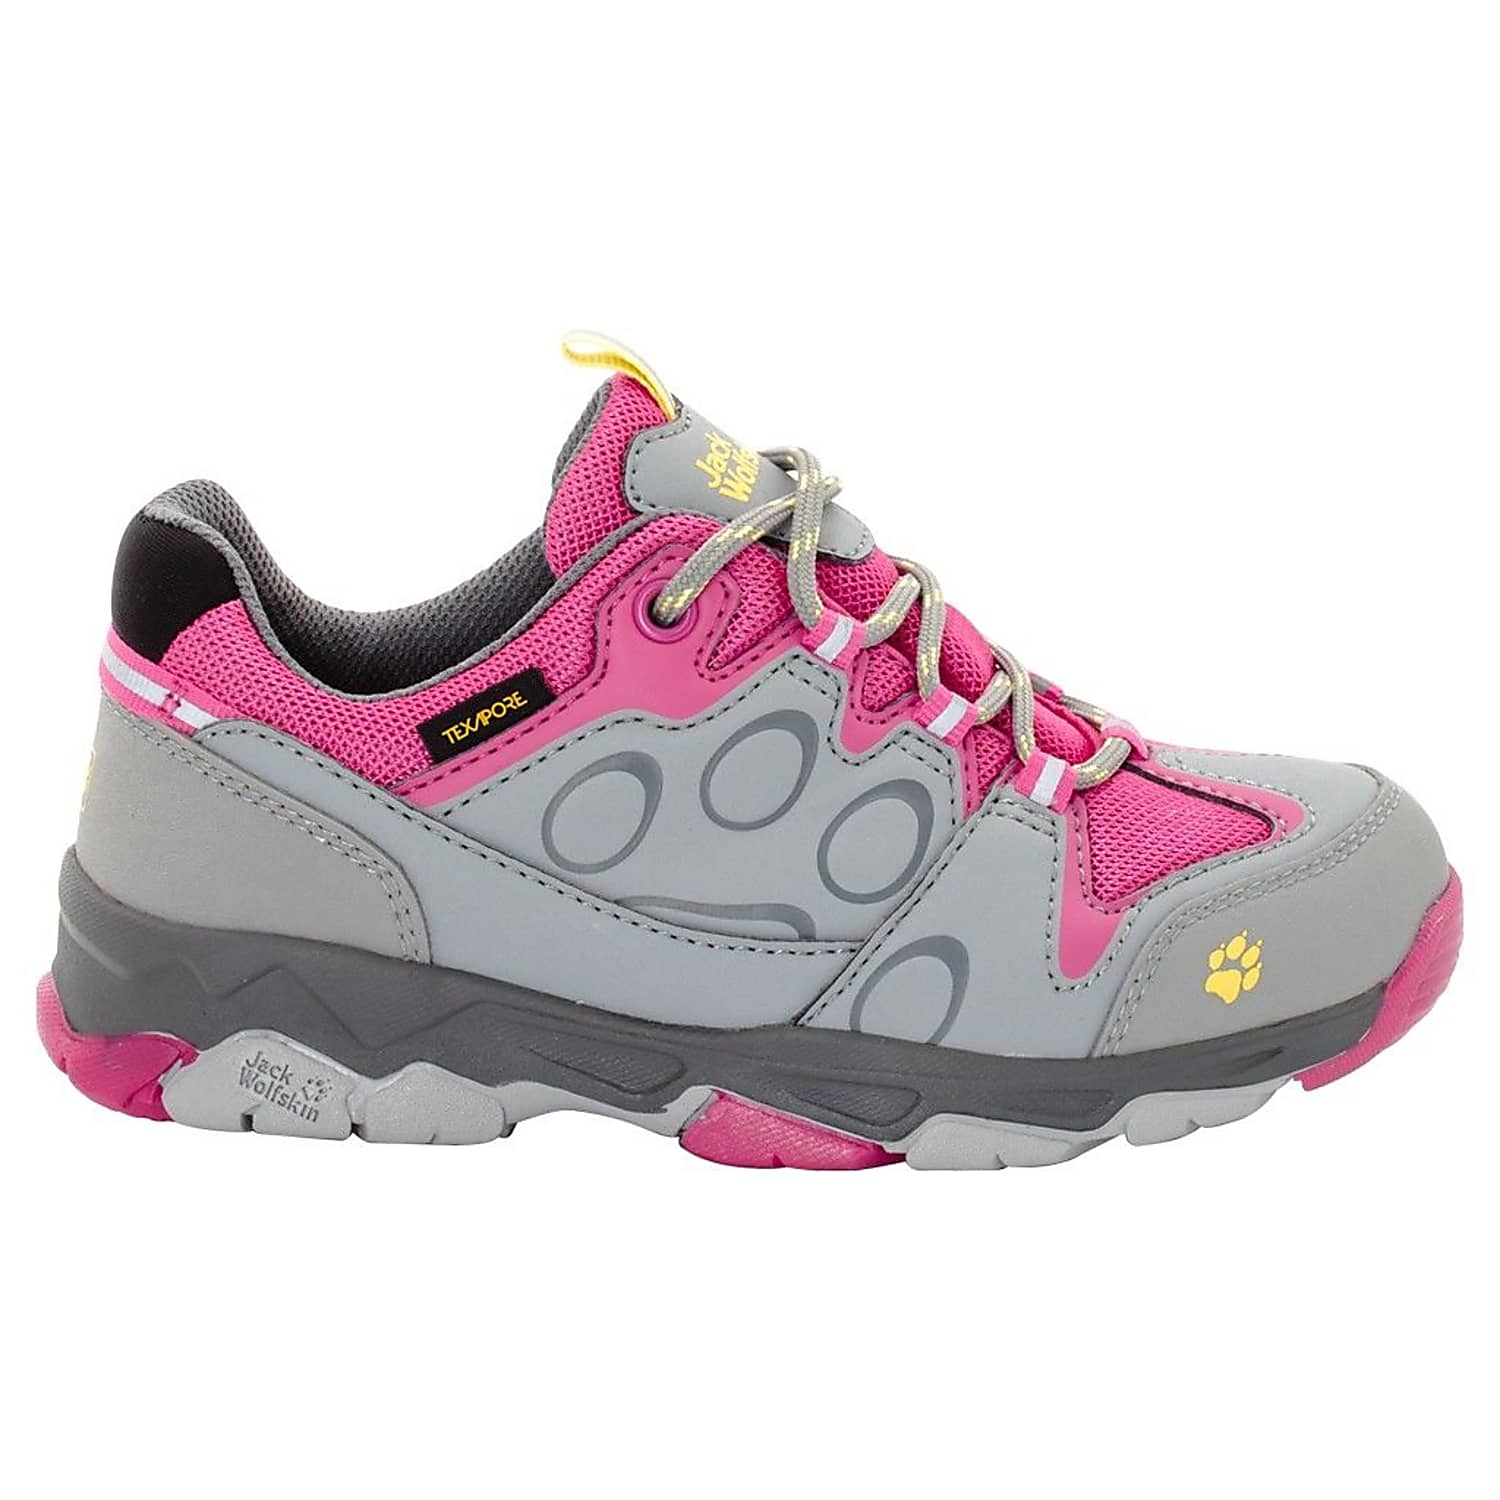 Jack Wolfskin KIDS MTN ATTACK shipping 2 TEXAPORE cheap LOW, Fast and Tropic - Pink